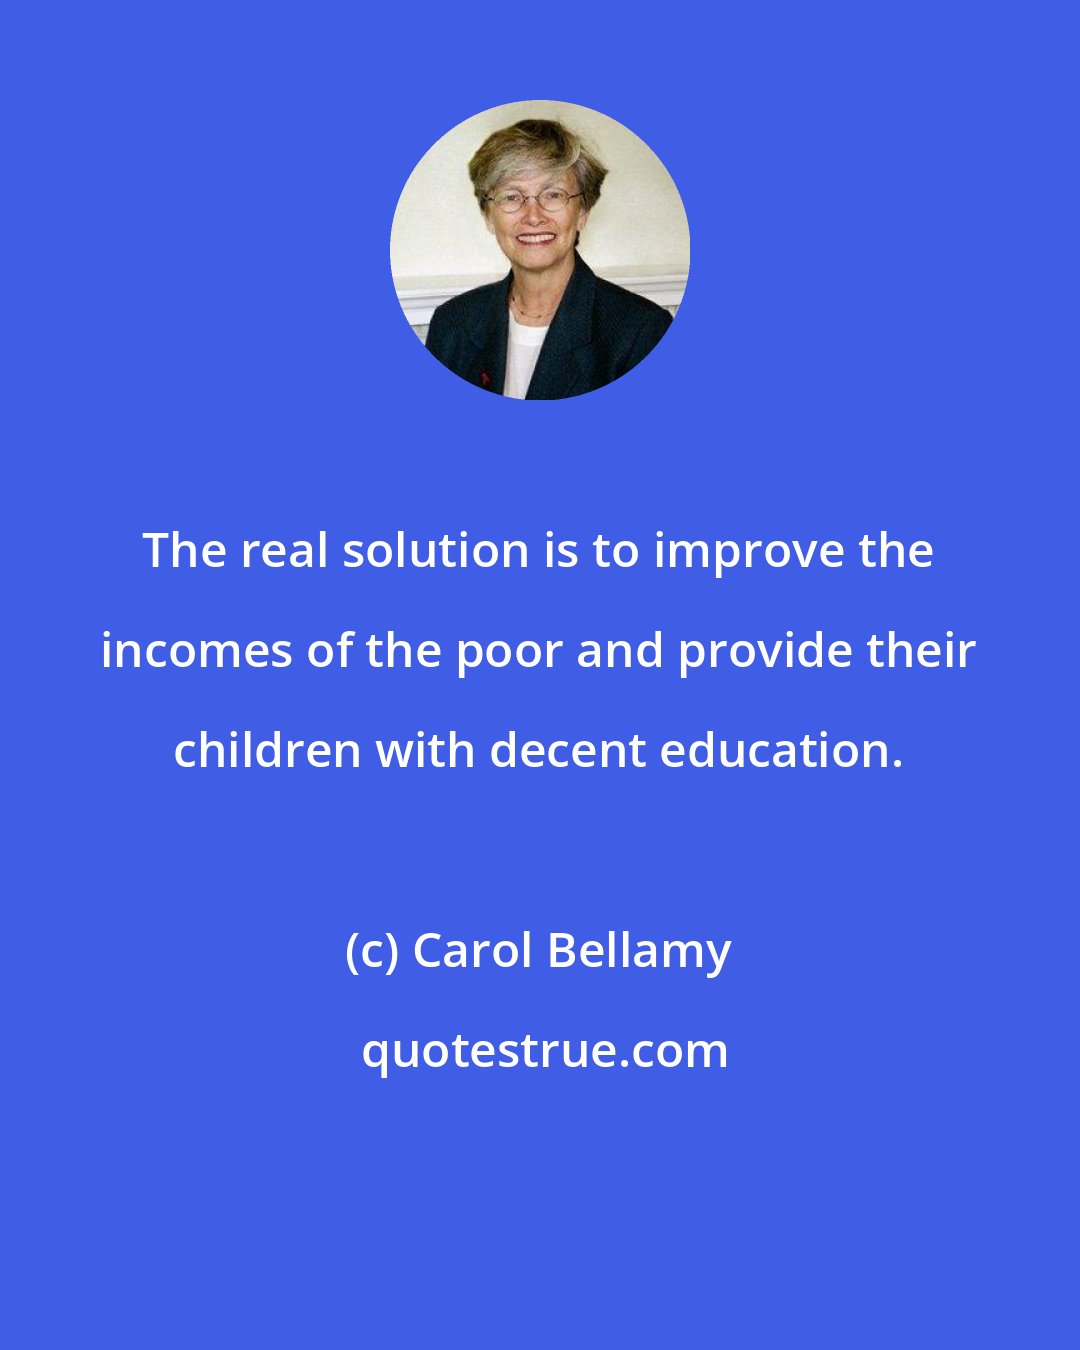 Carol Bellamy: The real solution is to improve the incomes of the poor and provide their children with decent education.